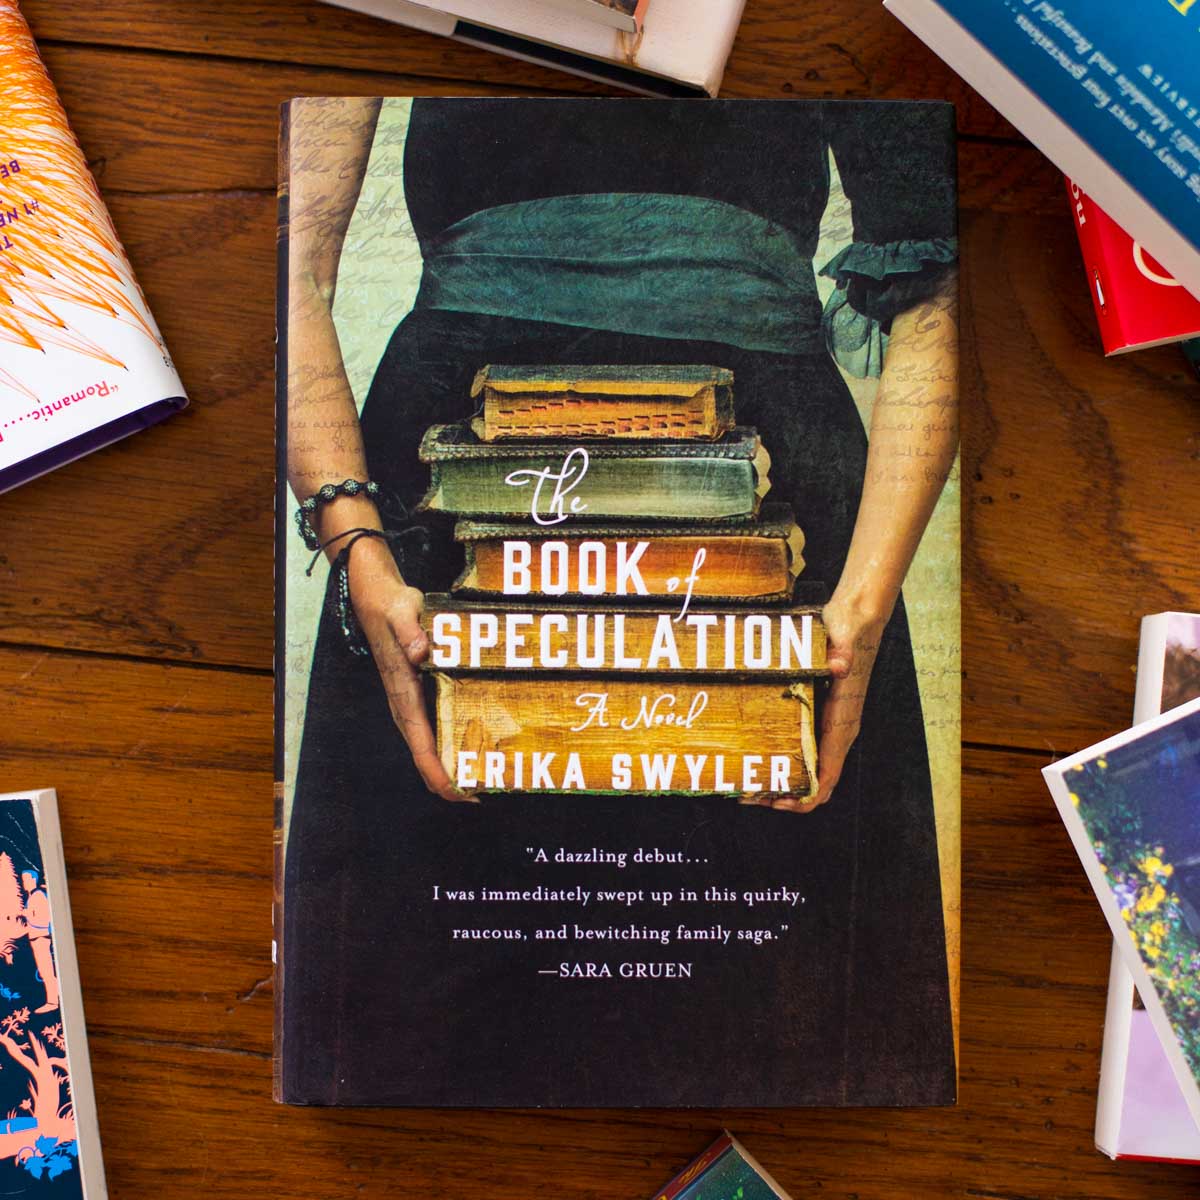 A copy of the Book of Speculation is on a table.